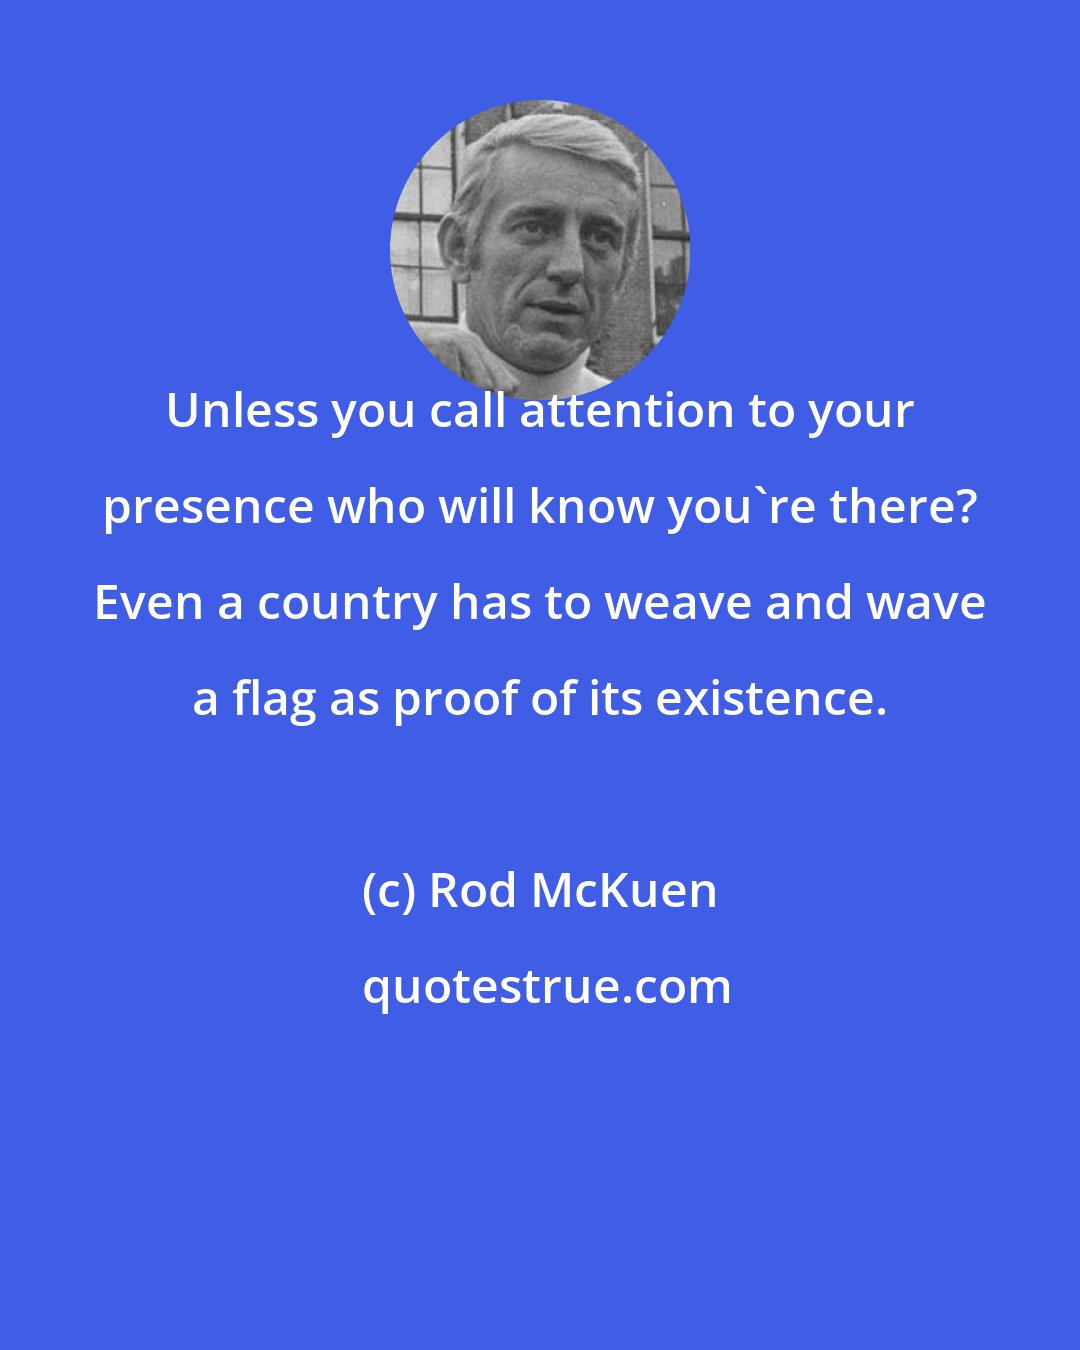 Rod McKuen: Unless you call attention to your presence who will know you're there? Even a country has to weave and wave a flag as proof of its existence.